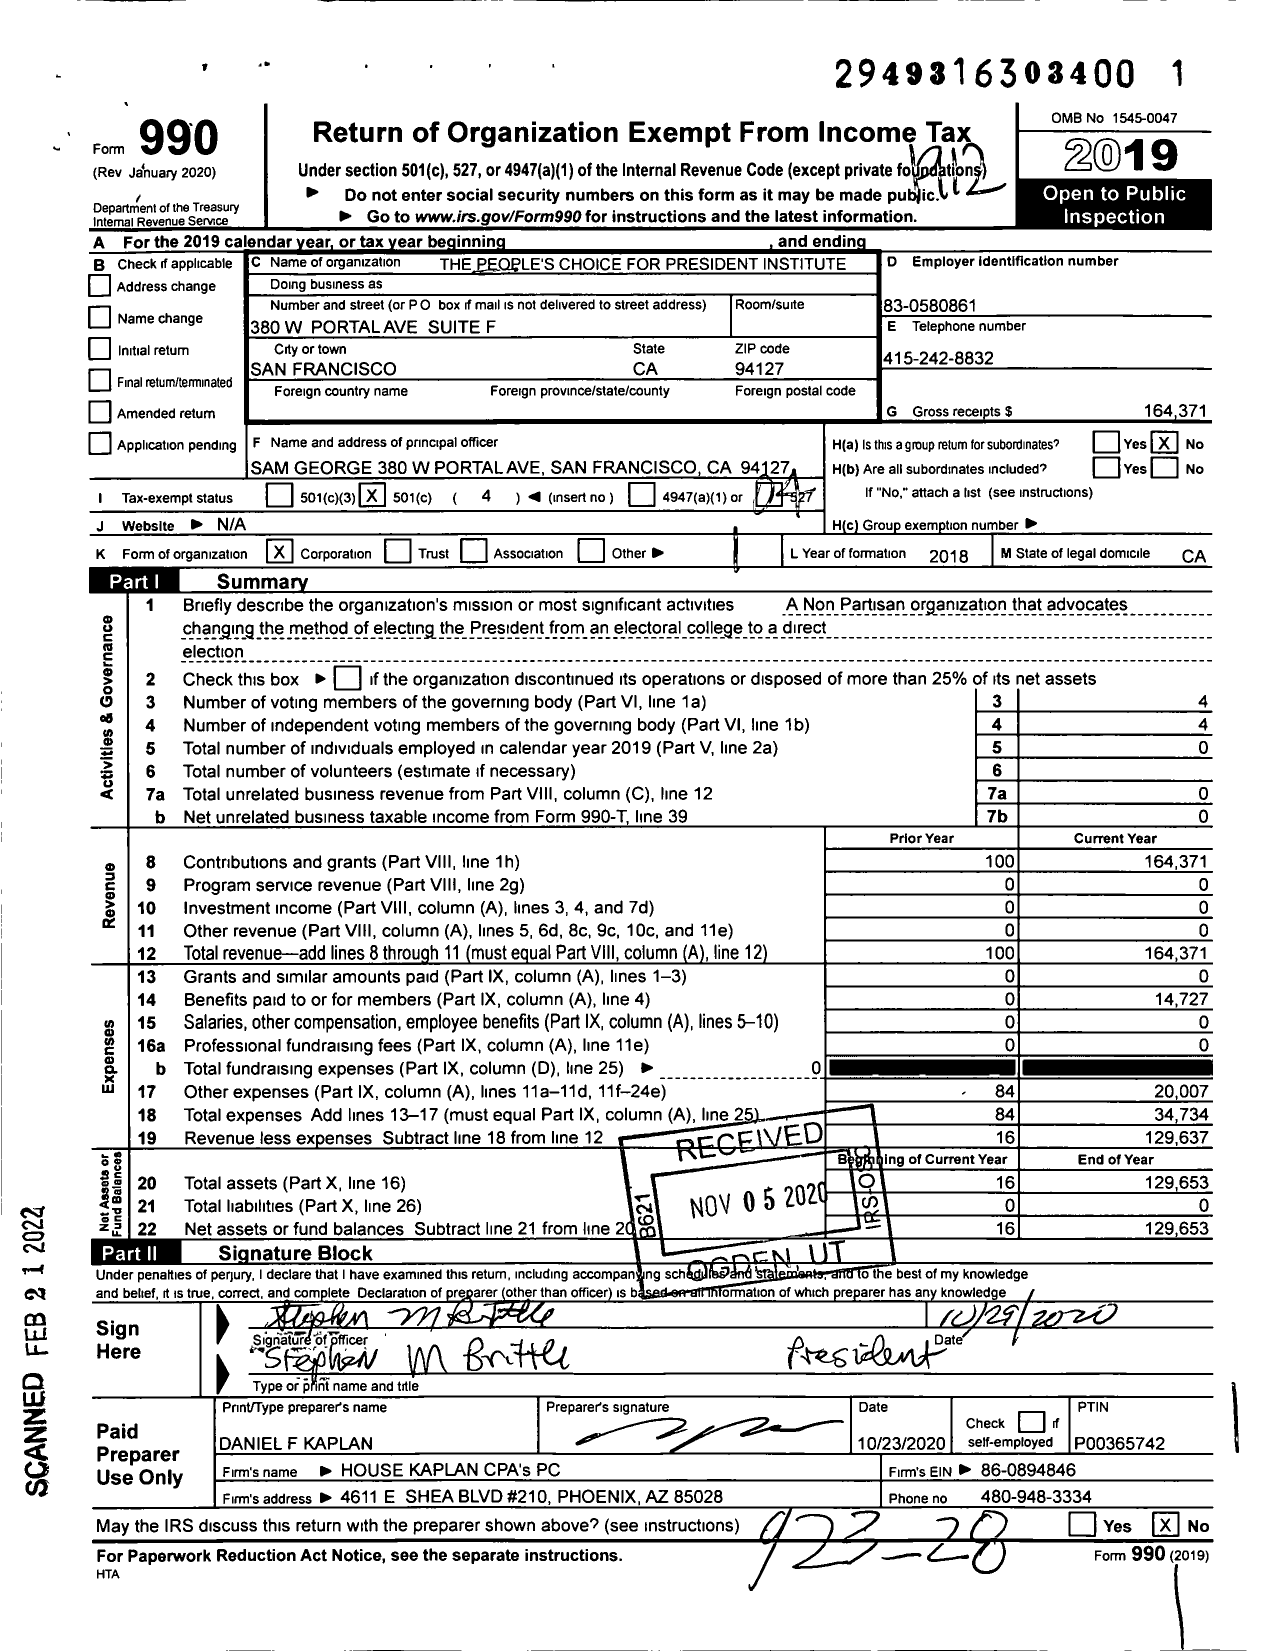 Image of first page of 2019 Form 990O for The People's Choice for President Institute